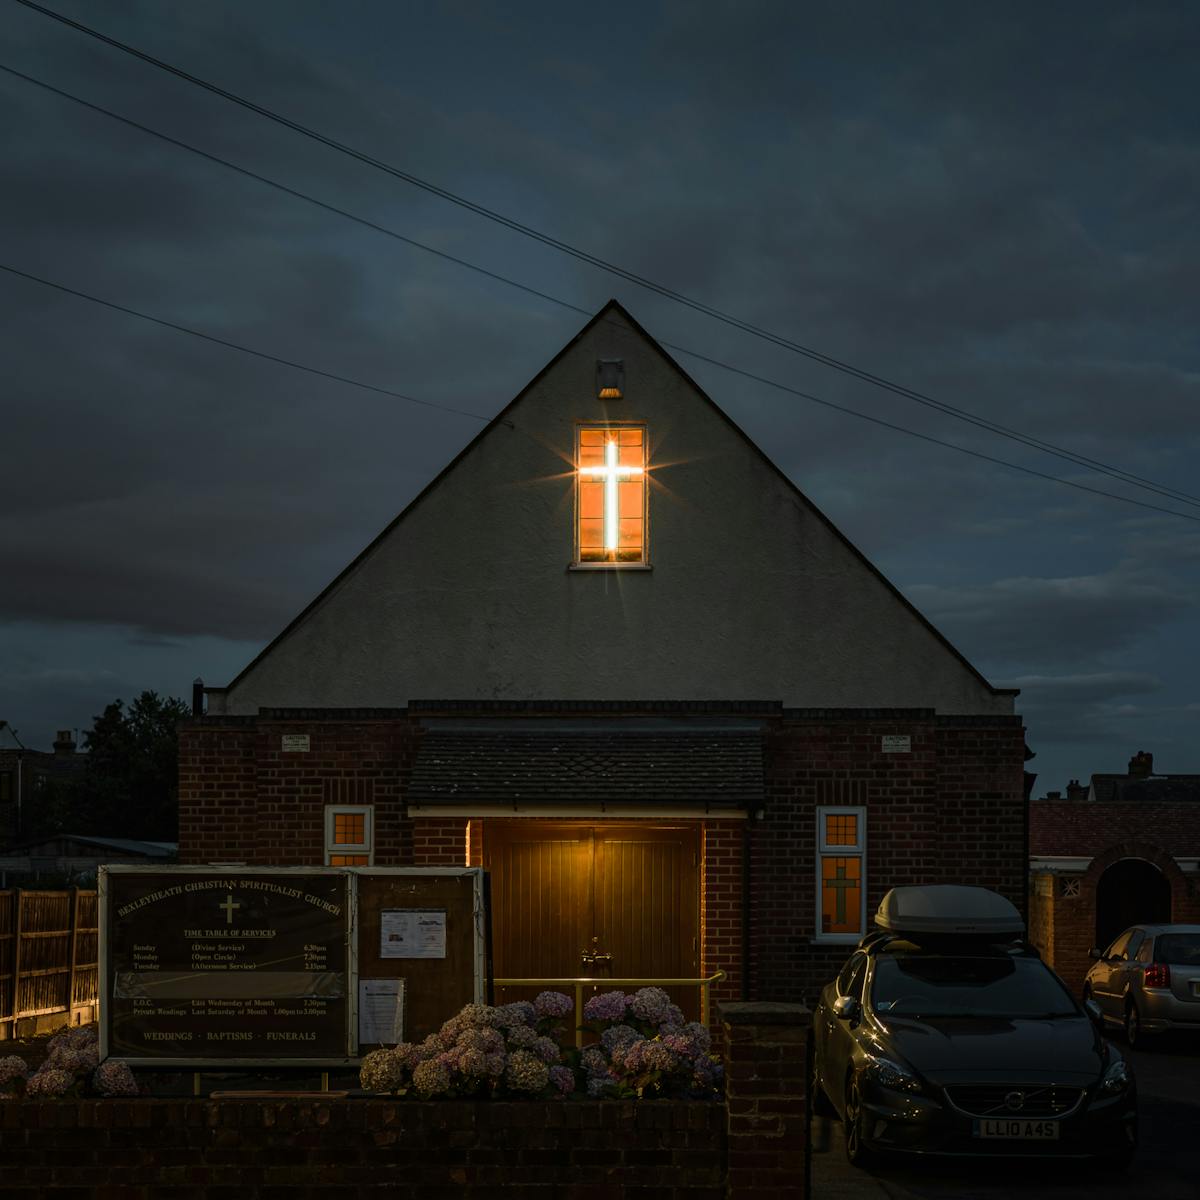 Photograph of Bexleyheath Christian Spiritualist Church at night. The two storey building is set in a residential street, detached but sandwiched between other residential buildings. The second storey shows a brightly lit window with a cross shaped light showing in the window.  To the right of the building are two cars.